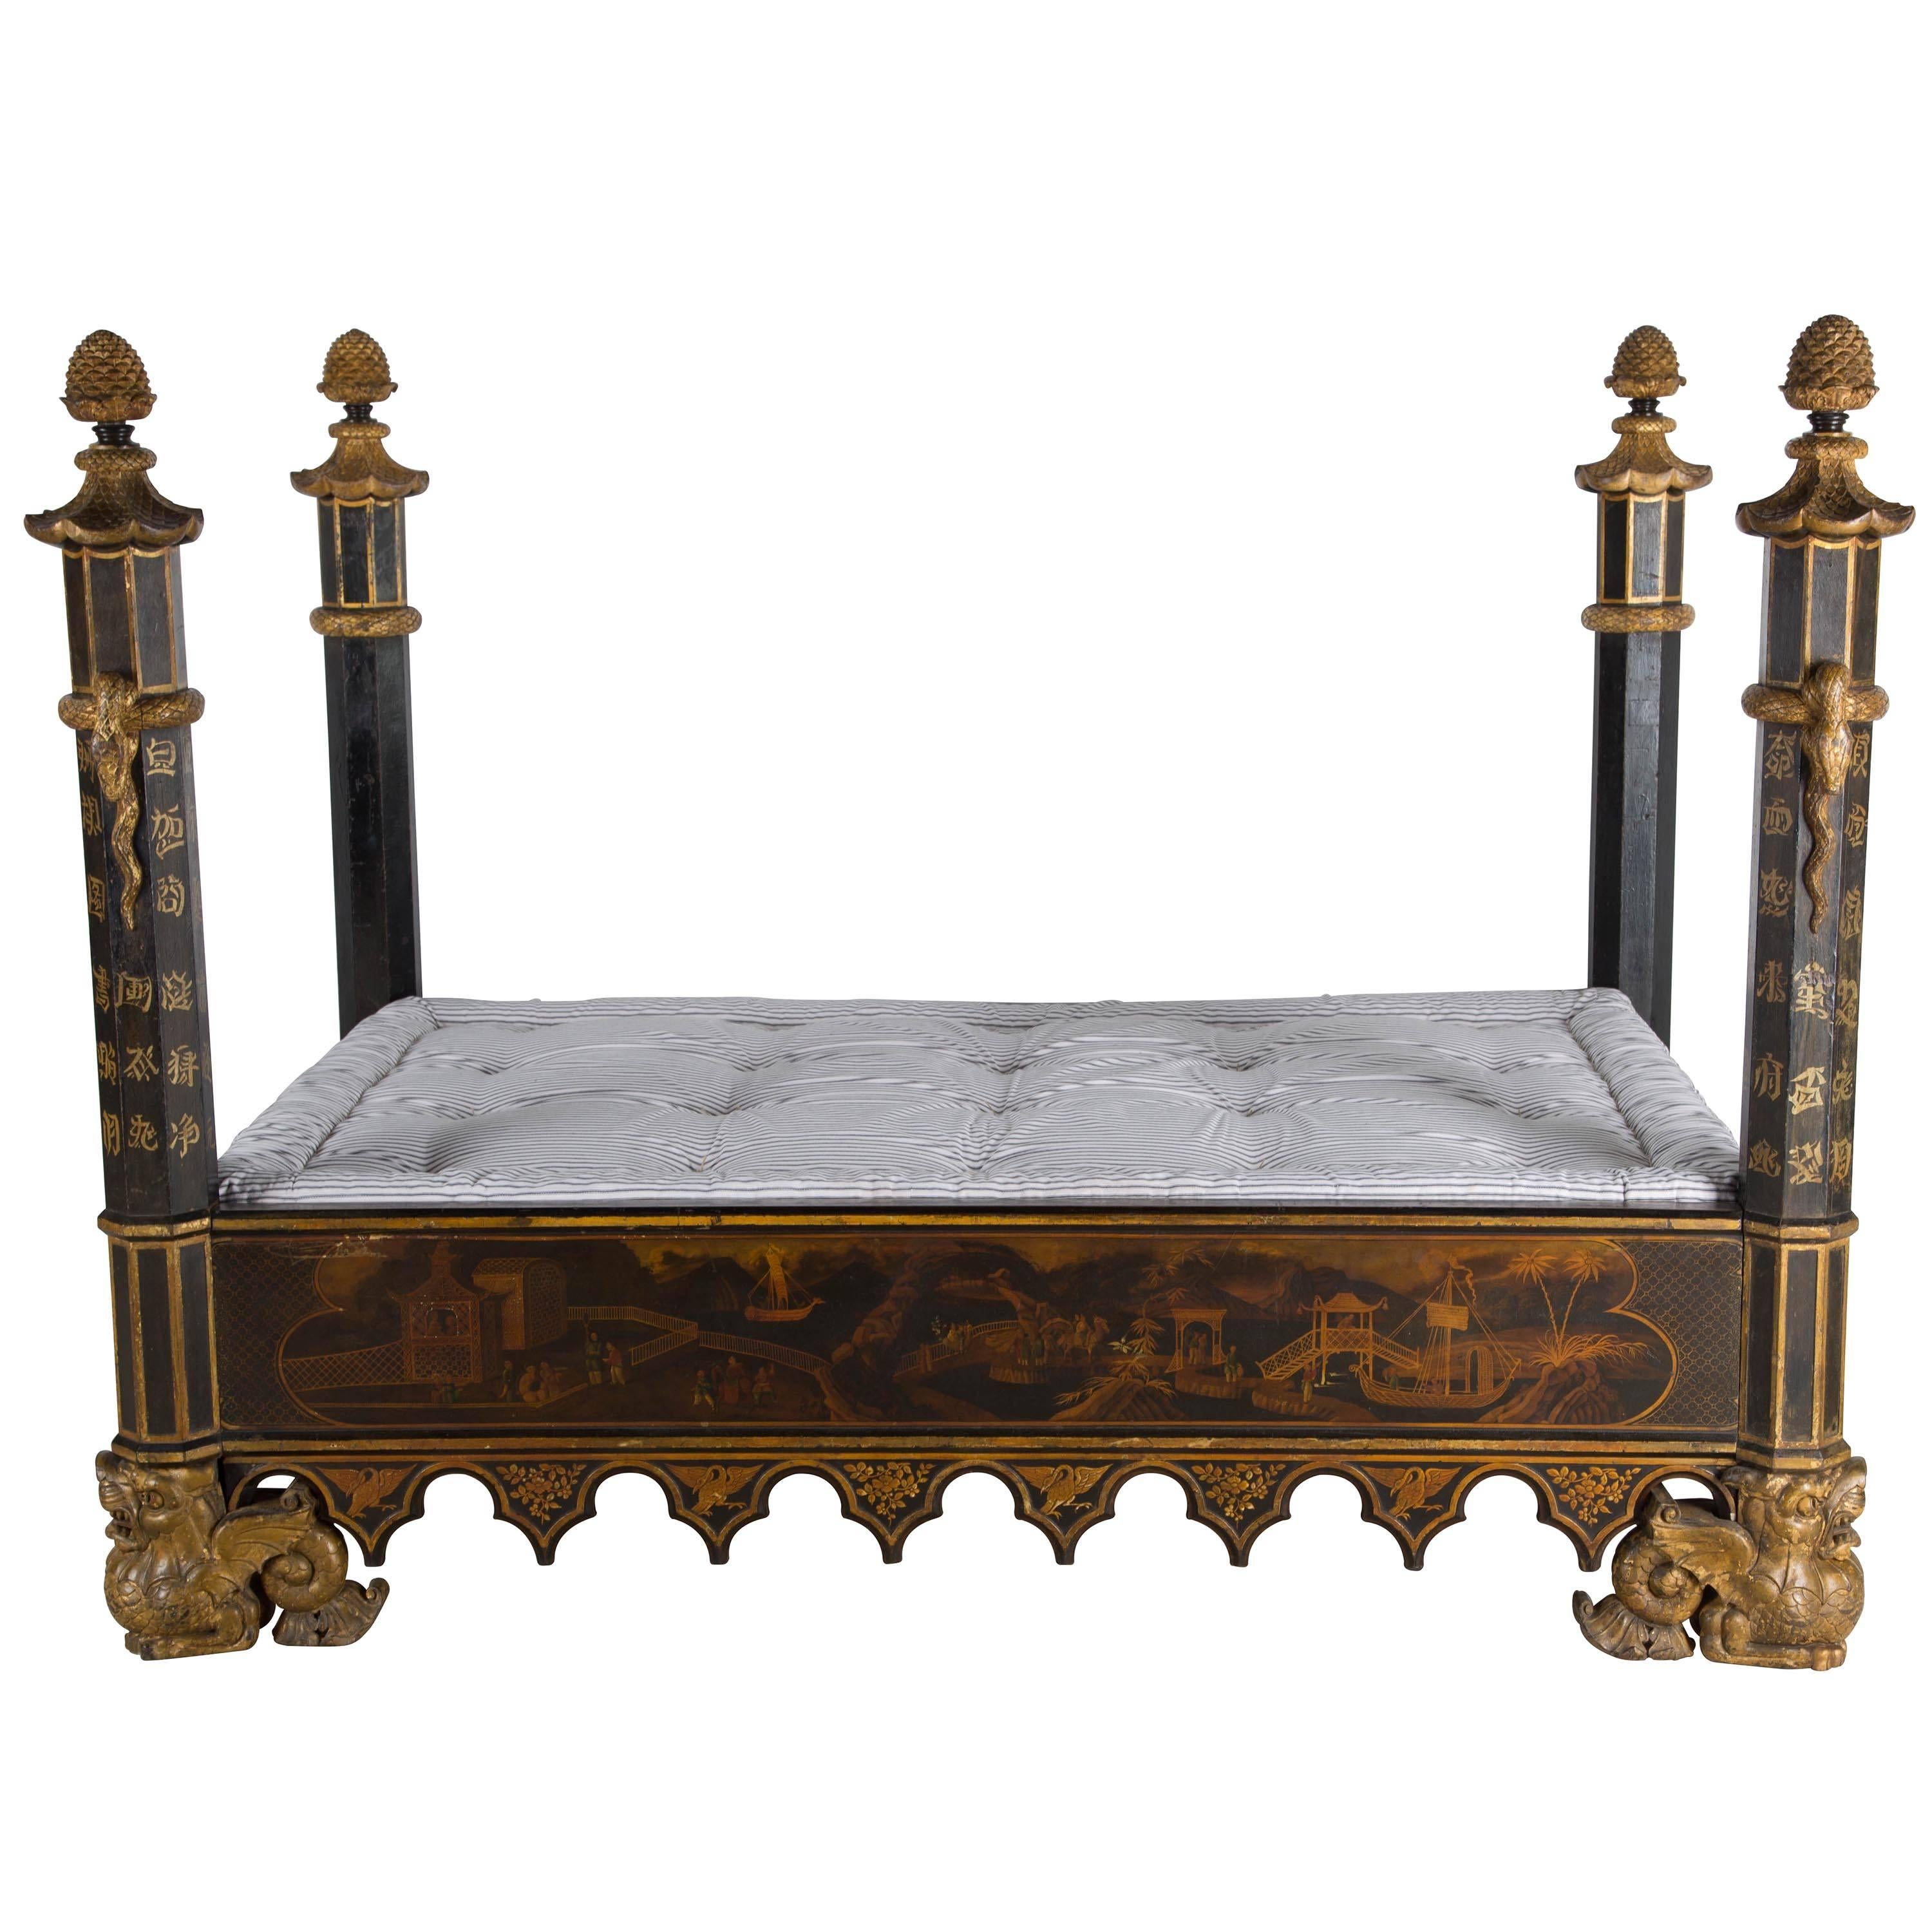 English Regency Four-Poster Chinoiserie Daybed